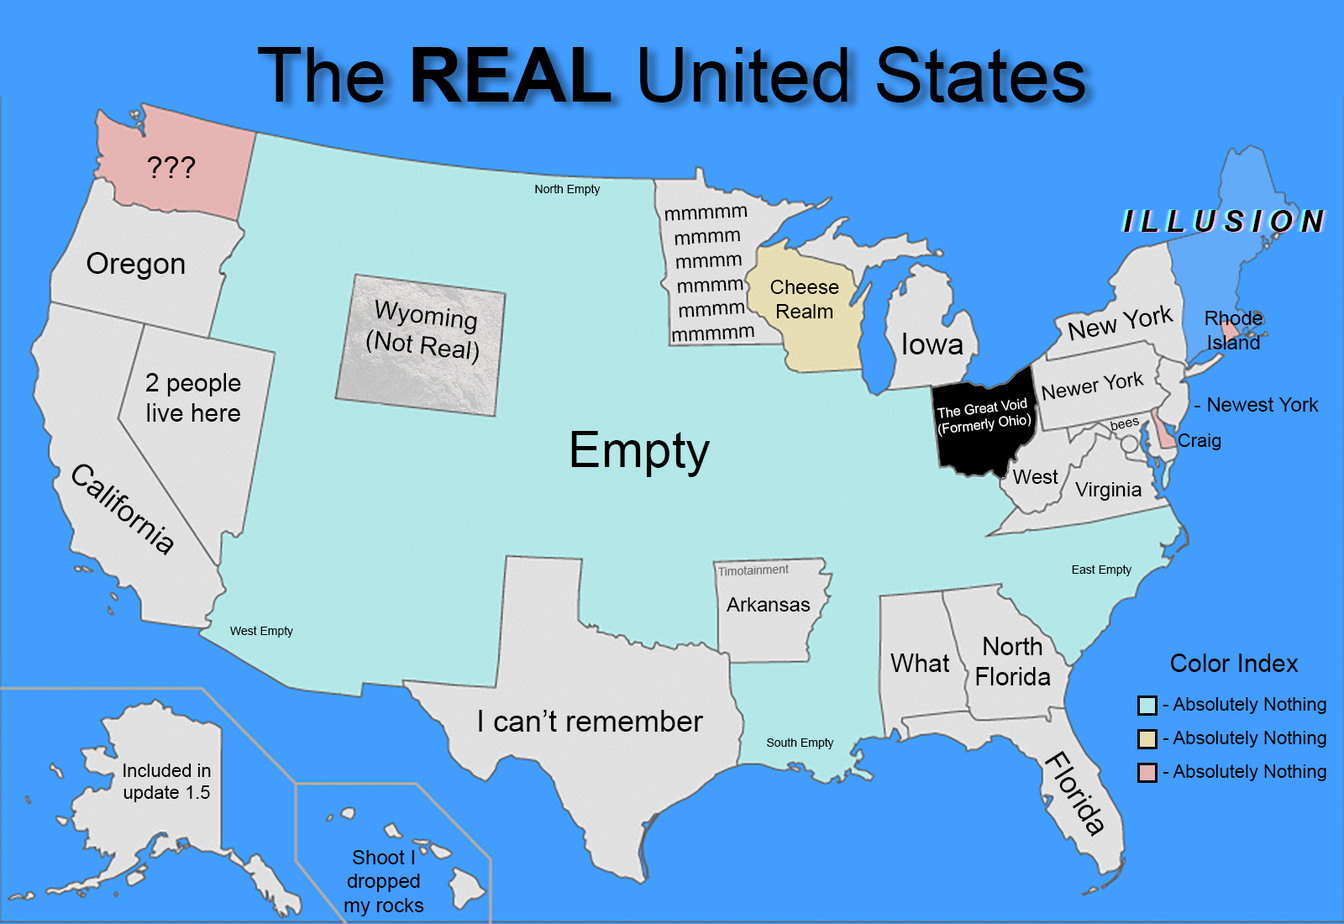 United States "of" America - Meme by besterminer :) Memedroid